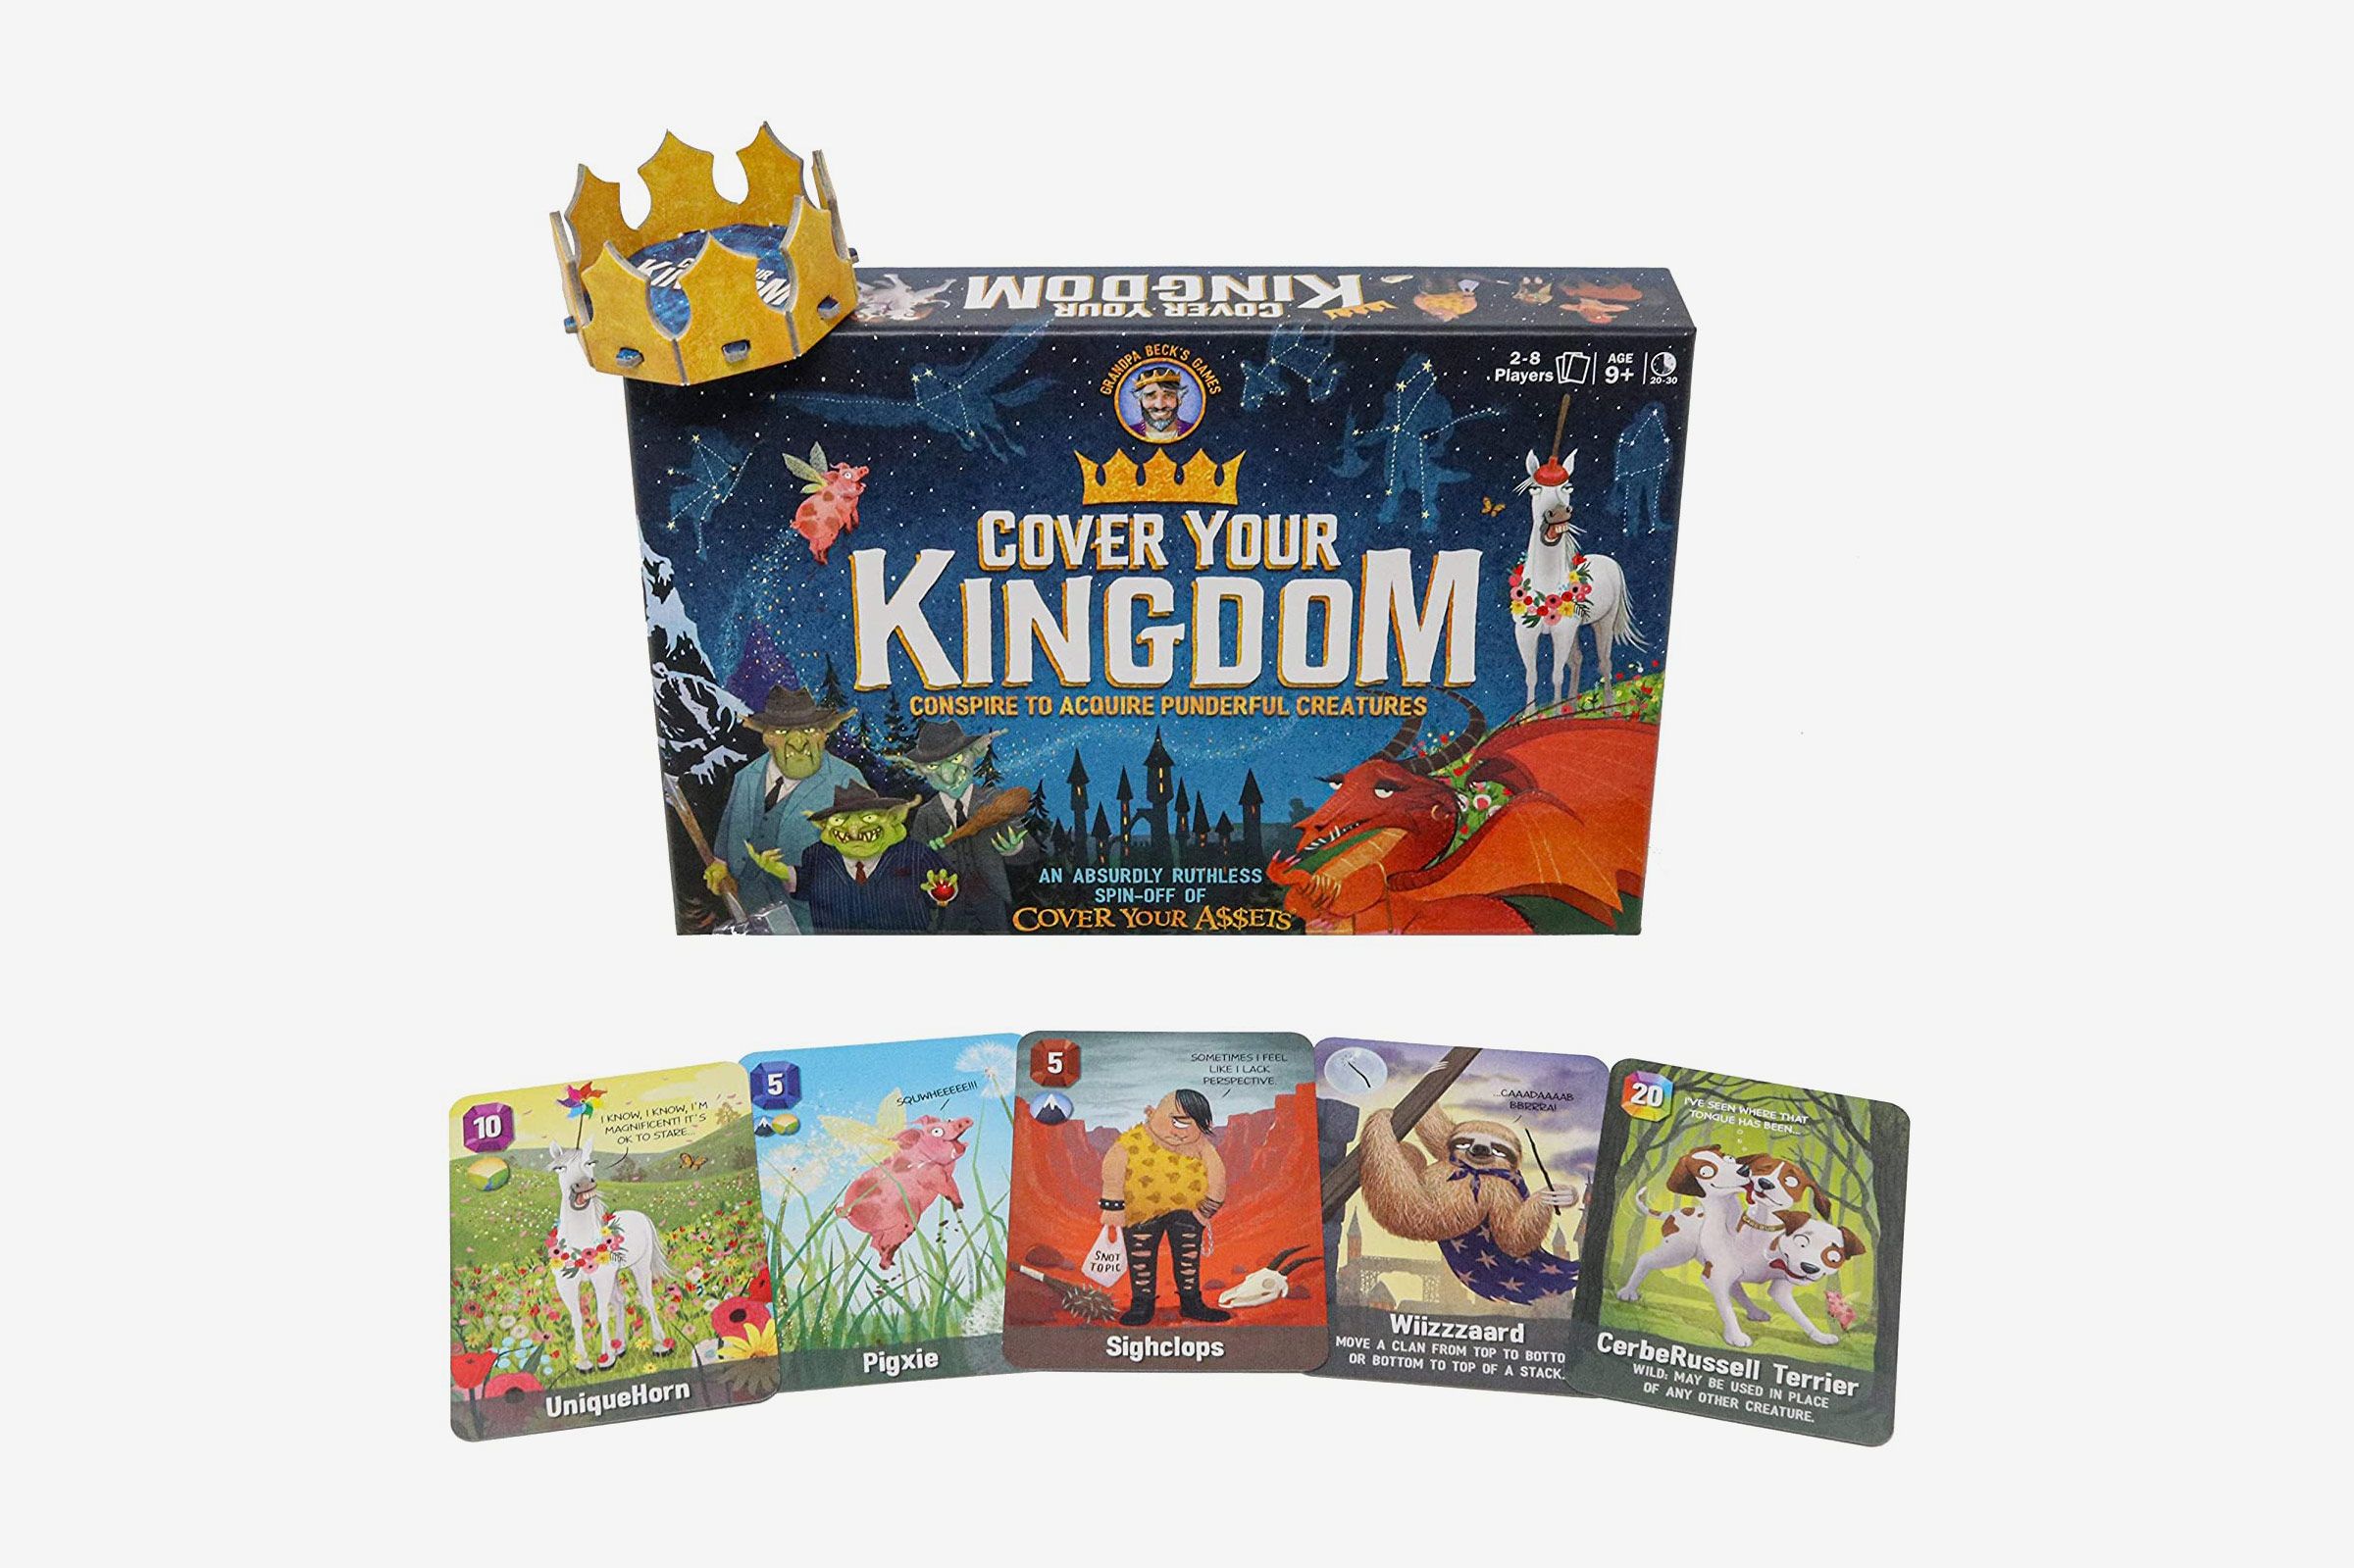 The Dad Suggests Best Family Board Games of 2021